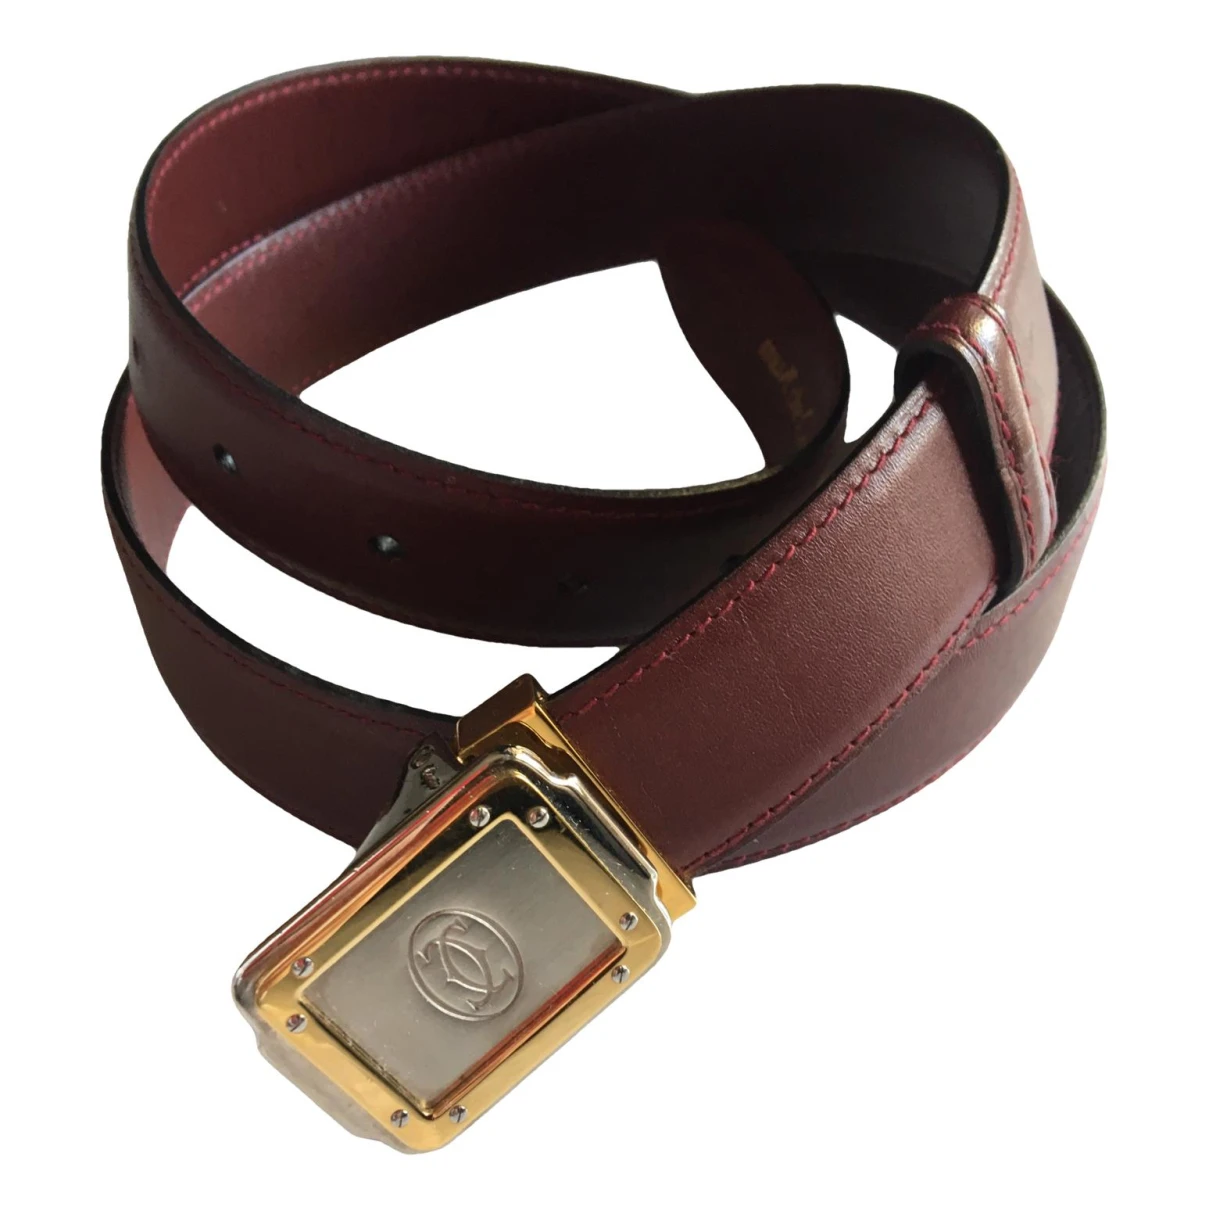 Pre-owned Cartier Leather Belt In Burgundy